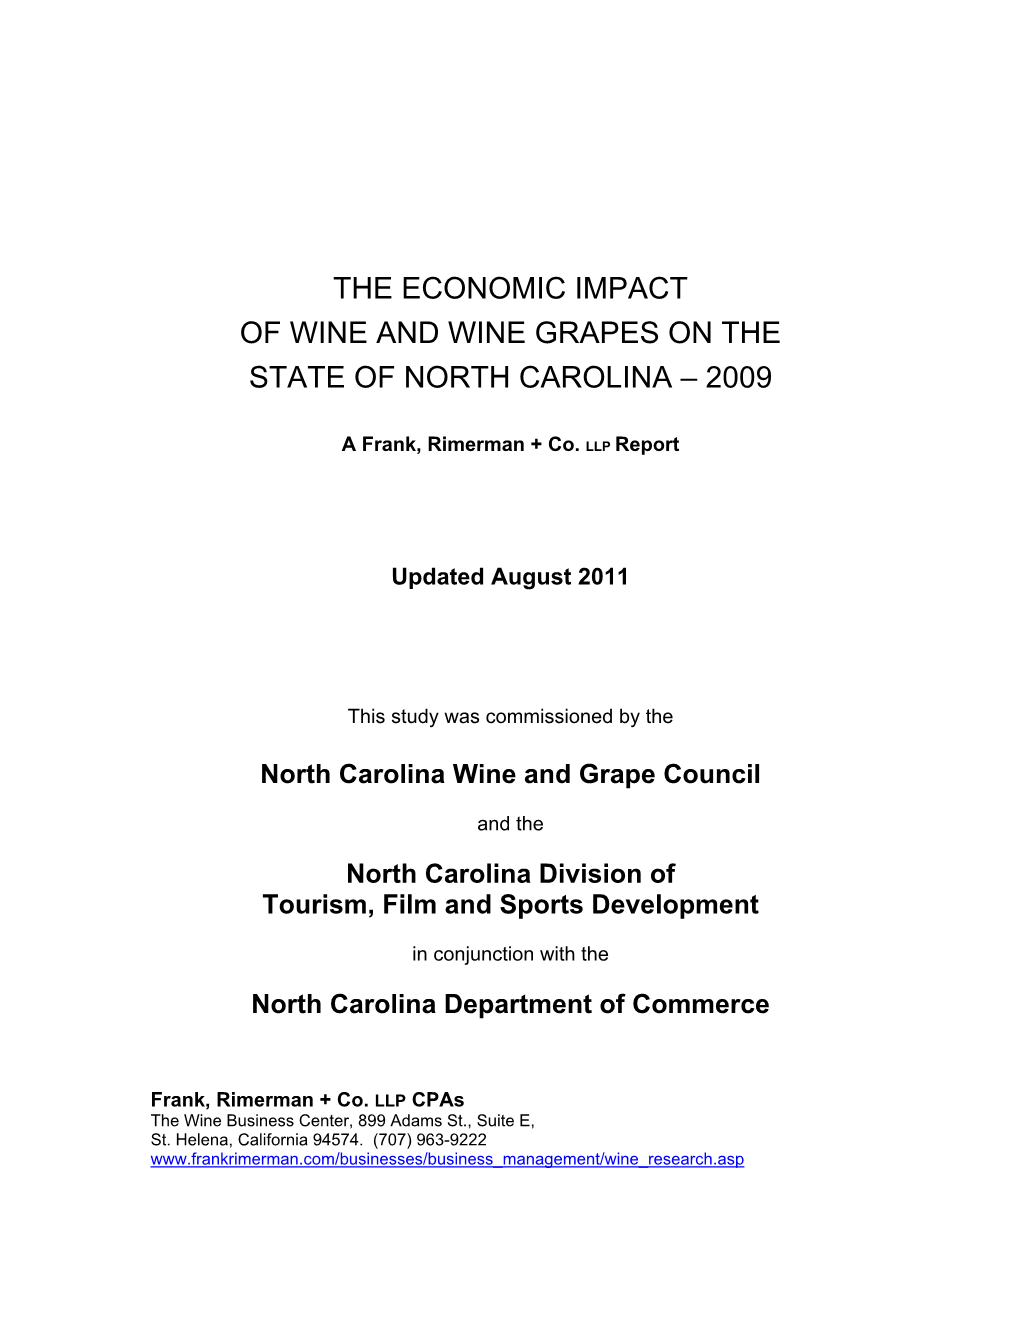 The Economic Impact of Wine and Wine Grapes on the State of North Carolina – 2009